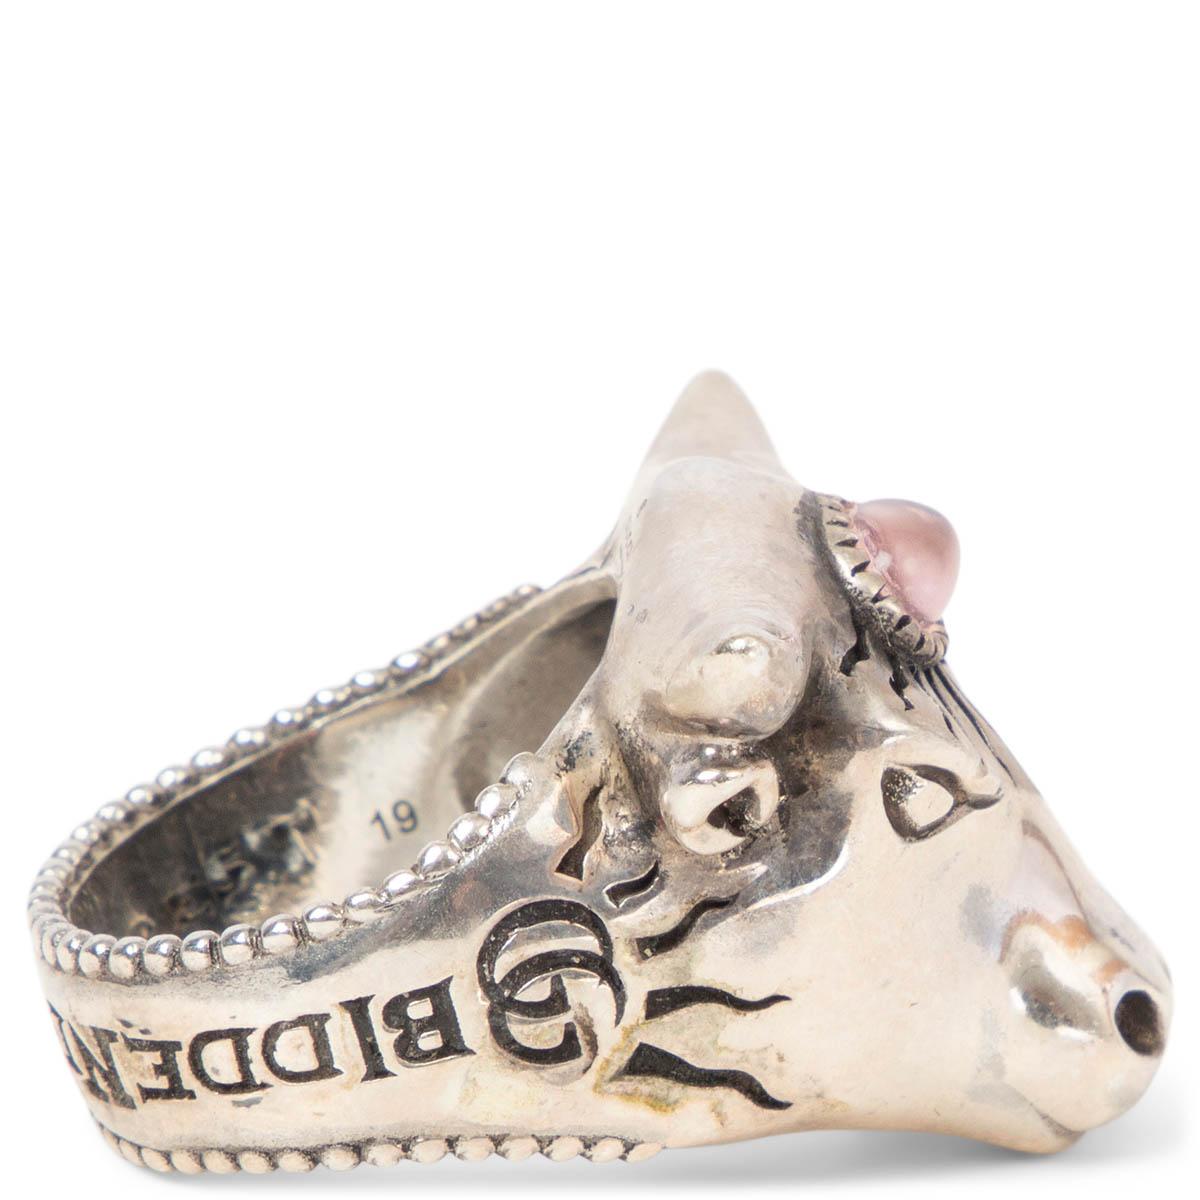 100% authentic Gucci Anger Forest Bull's Head ring in sterling silver with aged finish. Featuring a pink glass stone and 